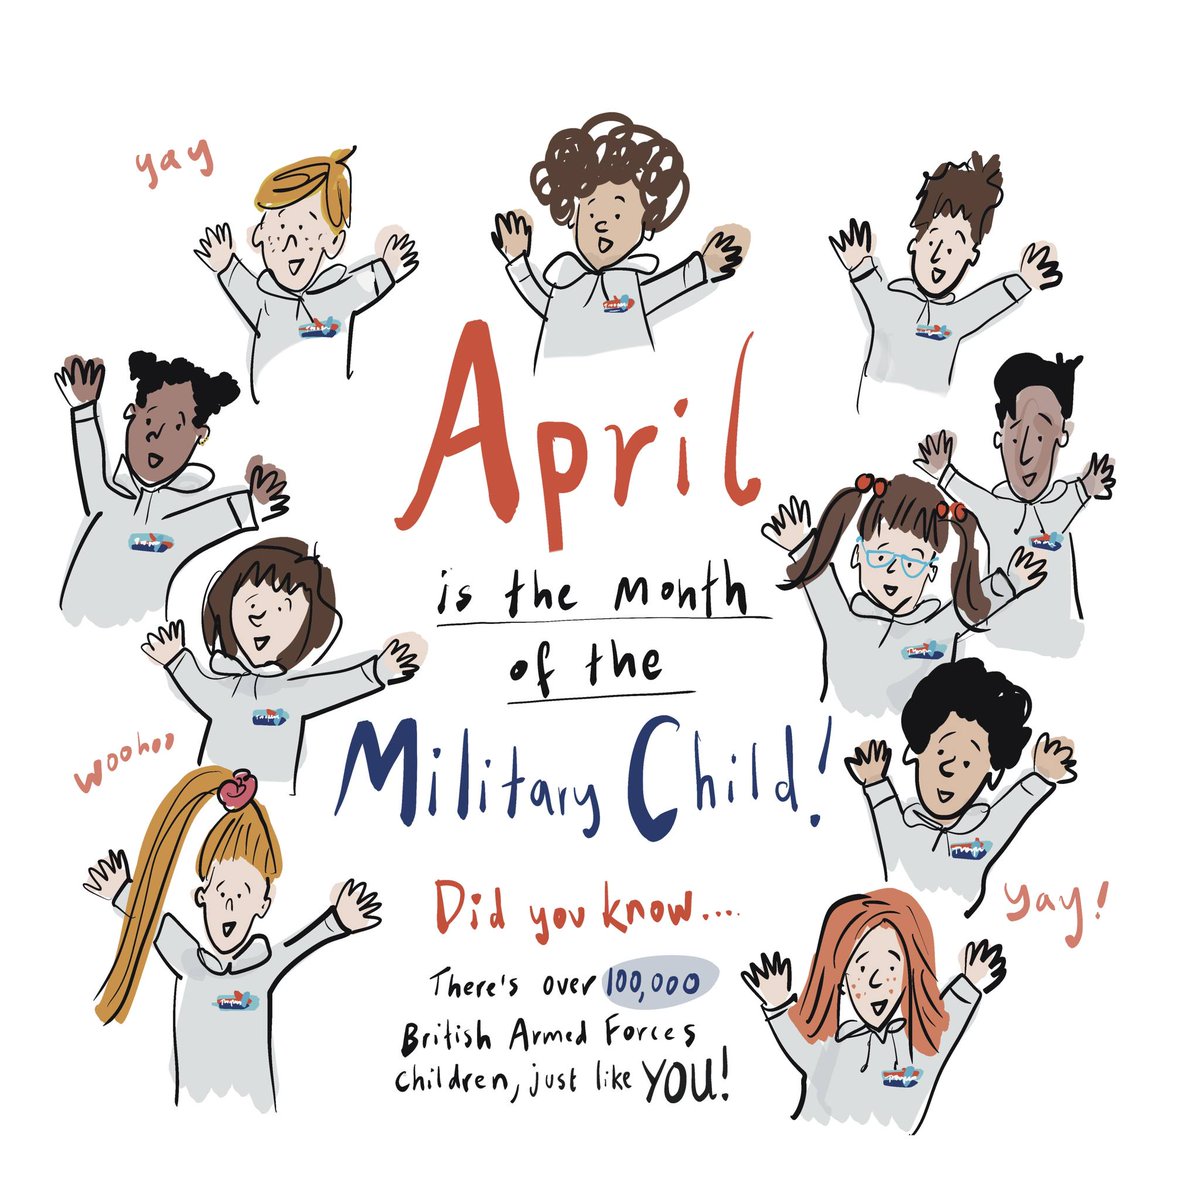 April is the Month of the Military Child. Come and get involved in our events and activities to help you celebrate with your little troopers littletroopers.net/month-of-the-m… #MonthOfTheMilitaryChild